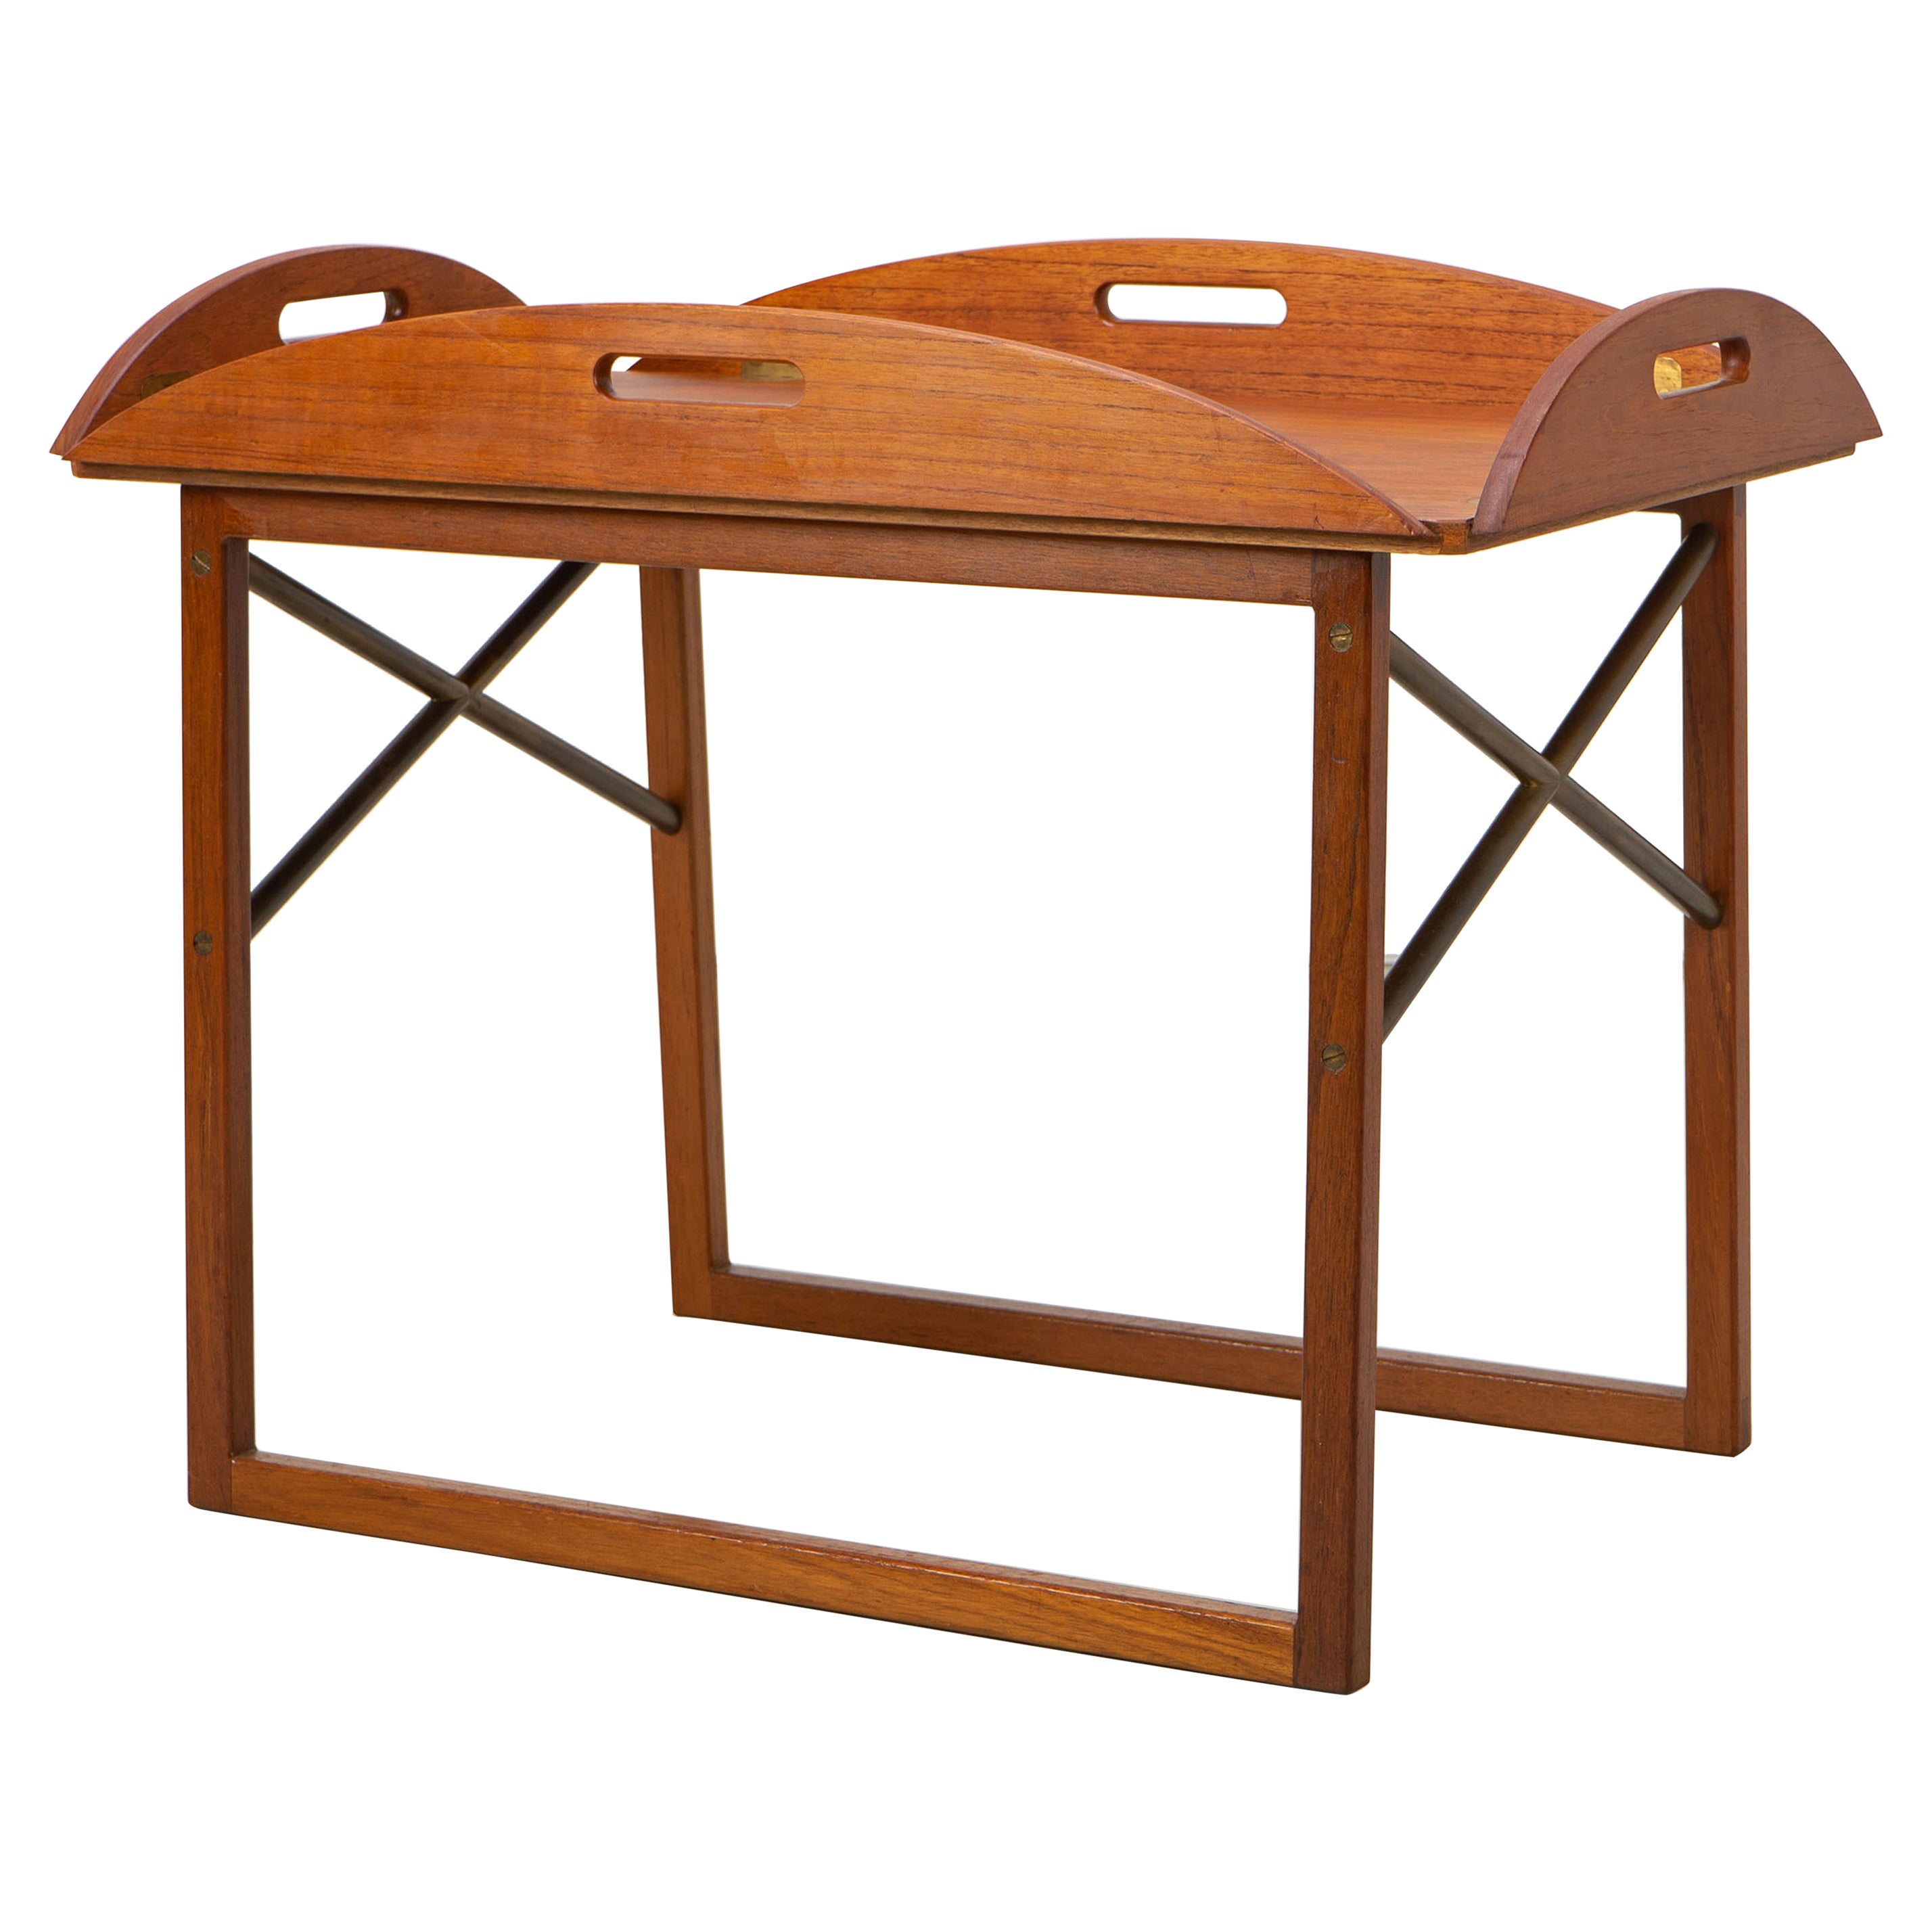 Danish Tray Table by Svend Langkilde for Illums Bolighus Teak and Brass, 1960s For Sale